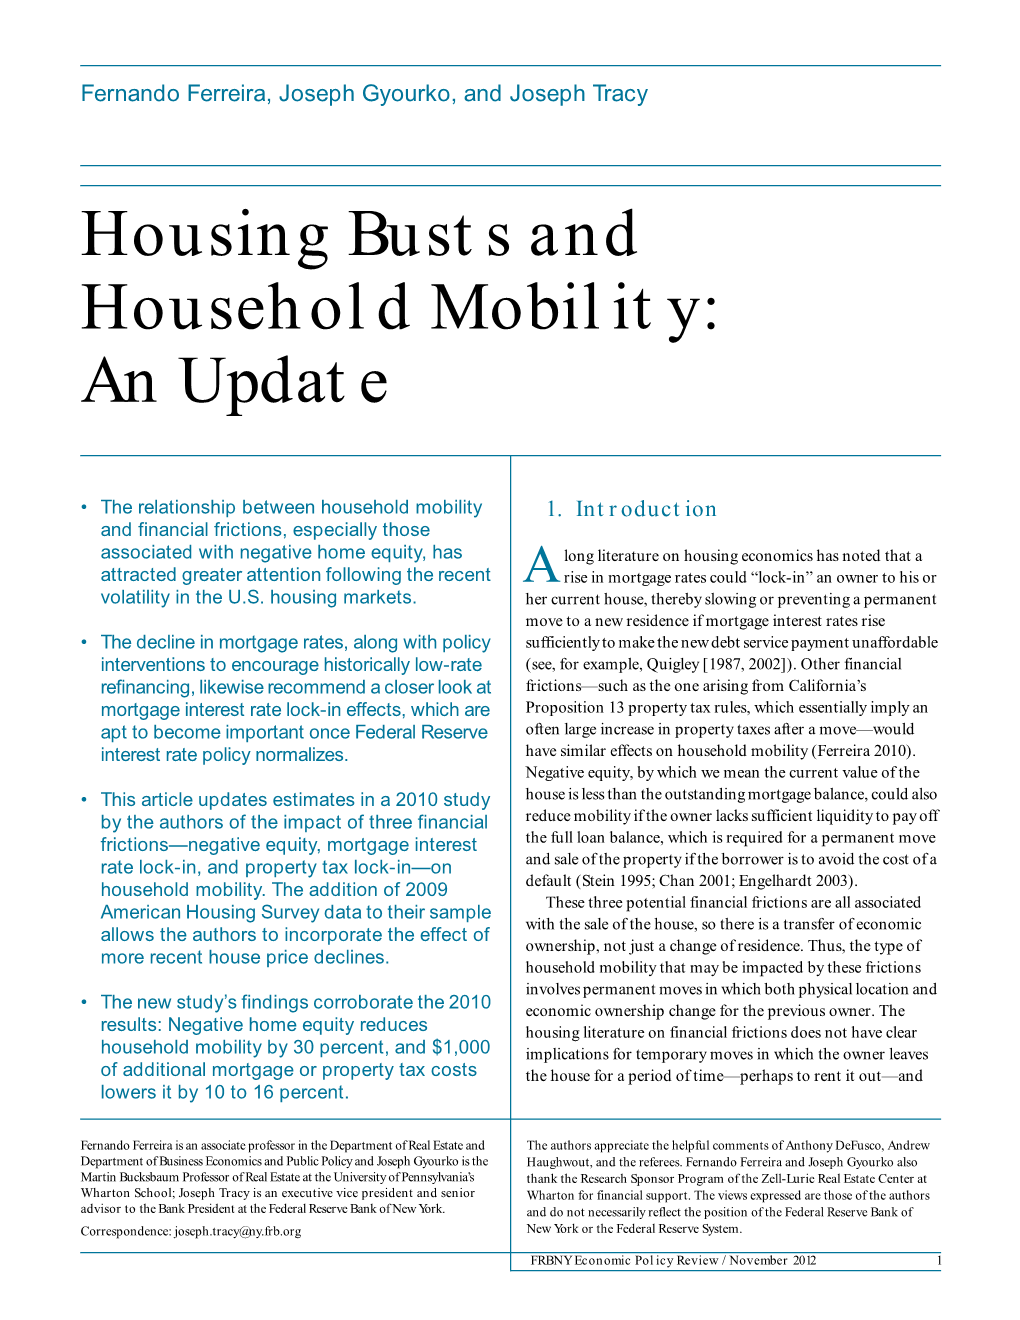 Housing Busts and Household Mobility: an Update